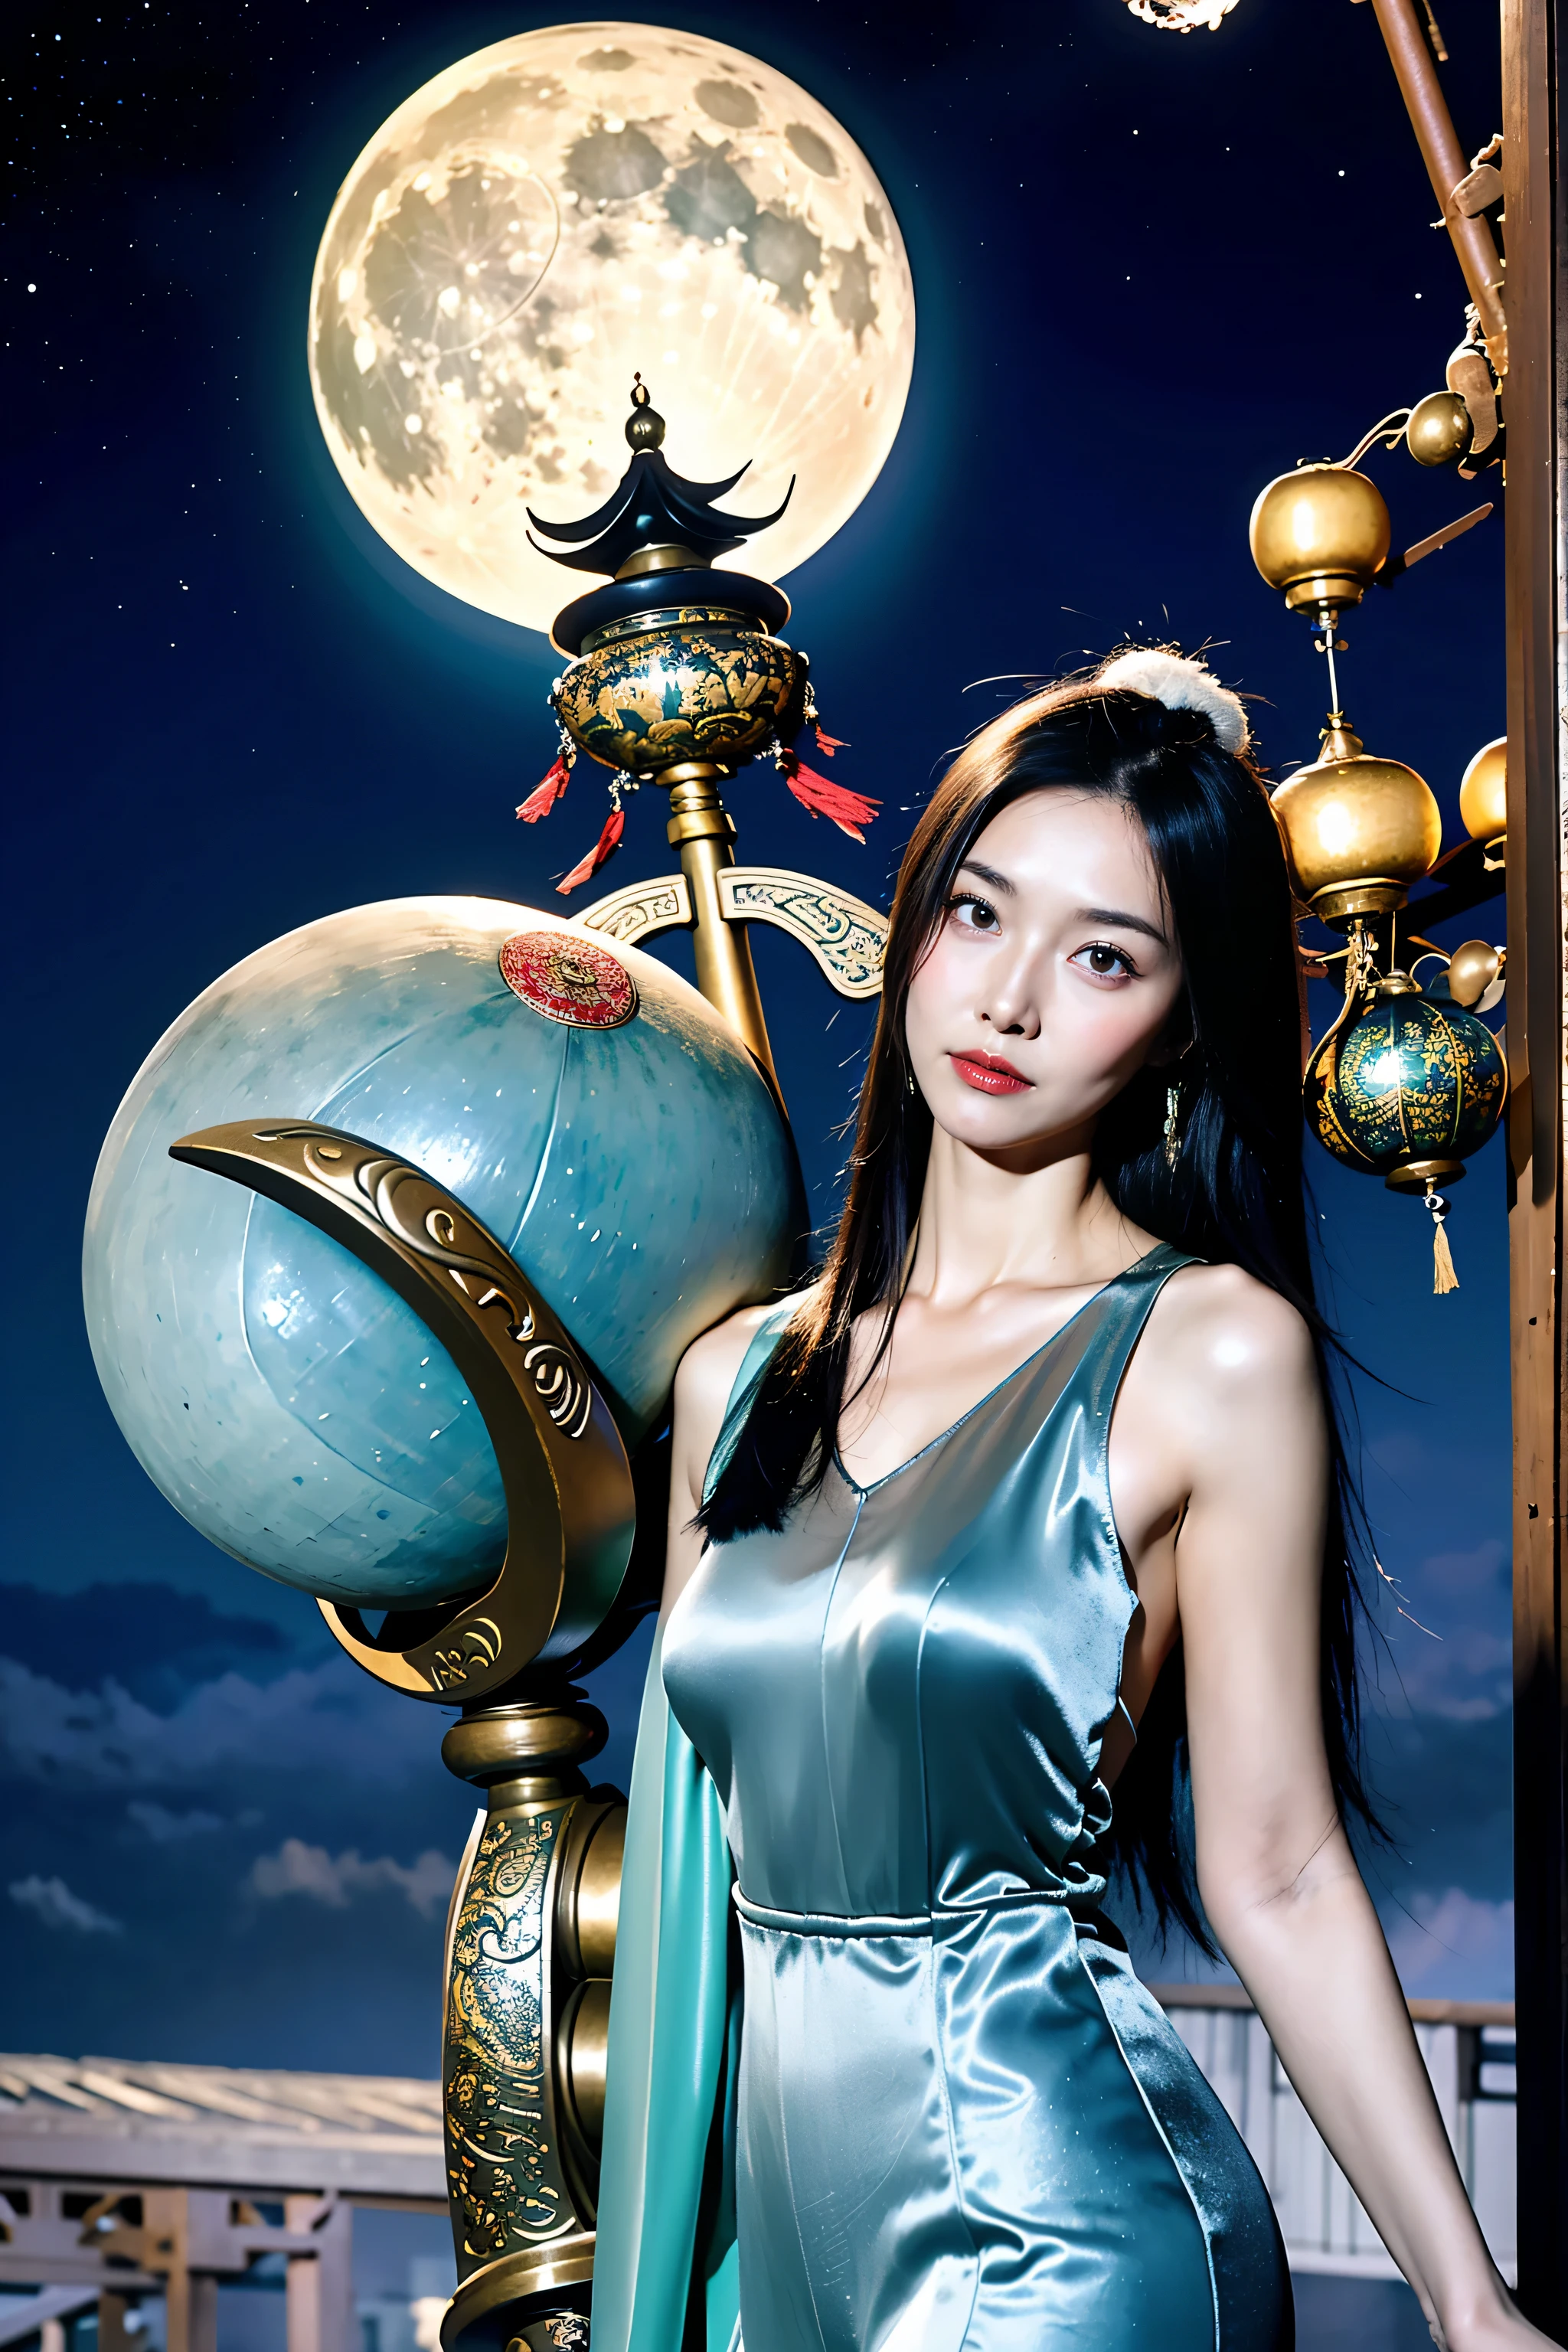 There is a Chang&#39;e in Chinese mythology&#39;e poses in front of the full moon, moon goddess, Moon themed clothing, Fairy&#39; Moonlight dance, Inspired by Tang Yin, moon goddess, shaxi, moon goddess, Inspired by Qiu Ying, lulu chen, themed on the stars and moon, xianxia fantasy, the moon is behind her, lu ji